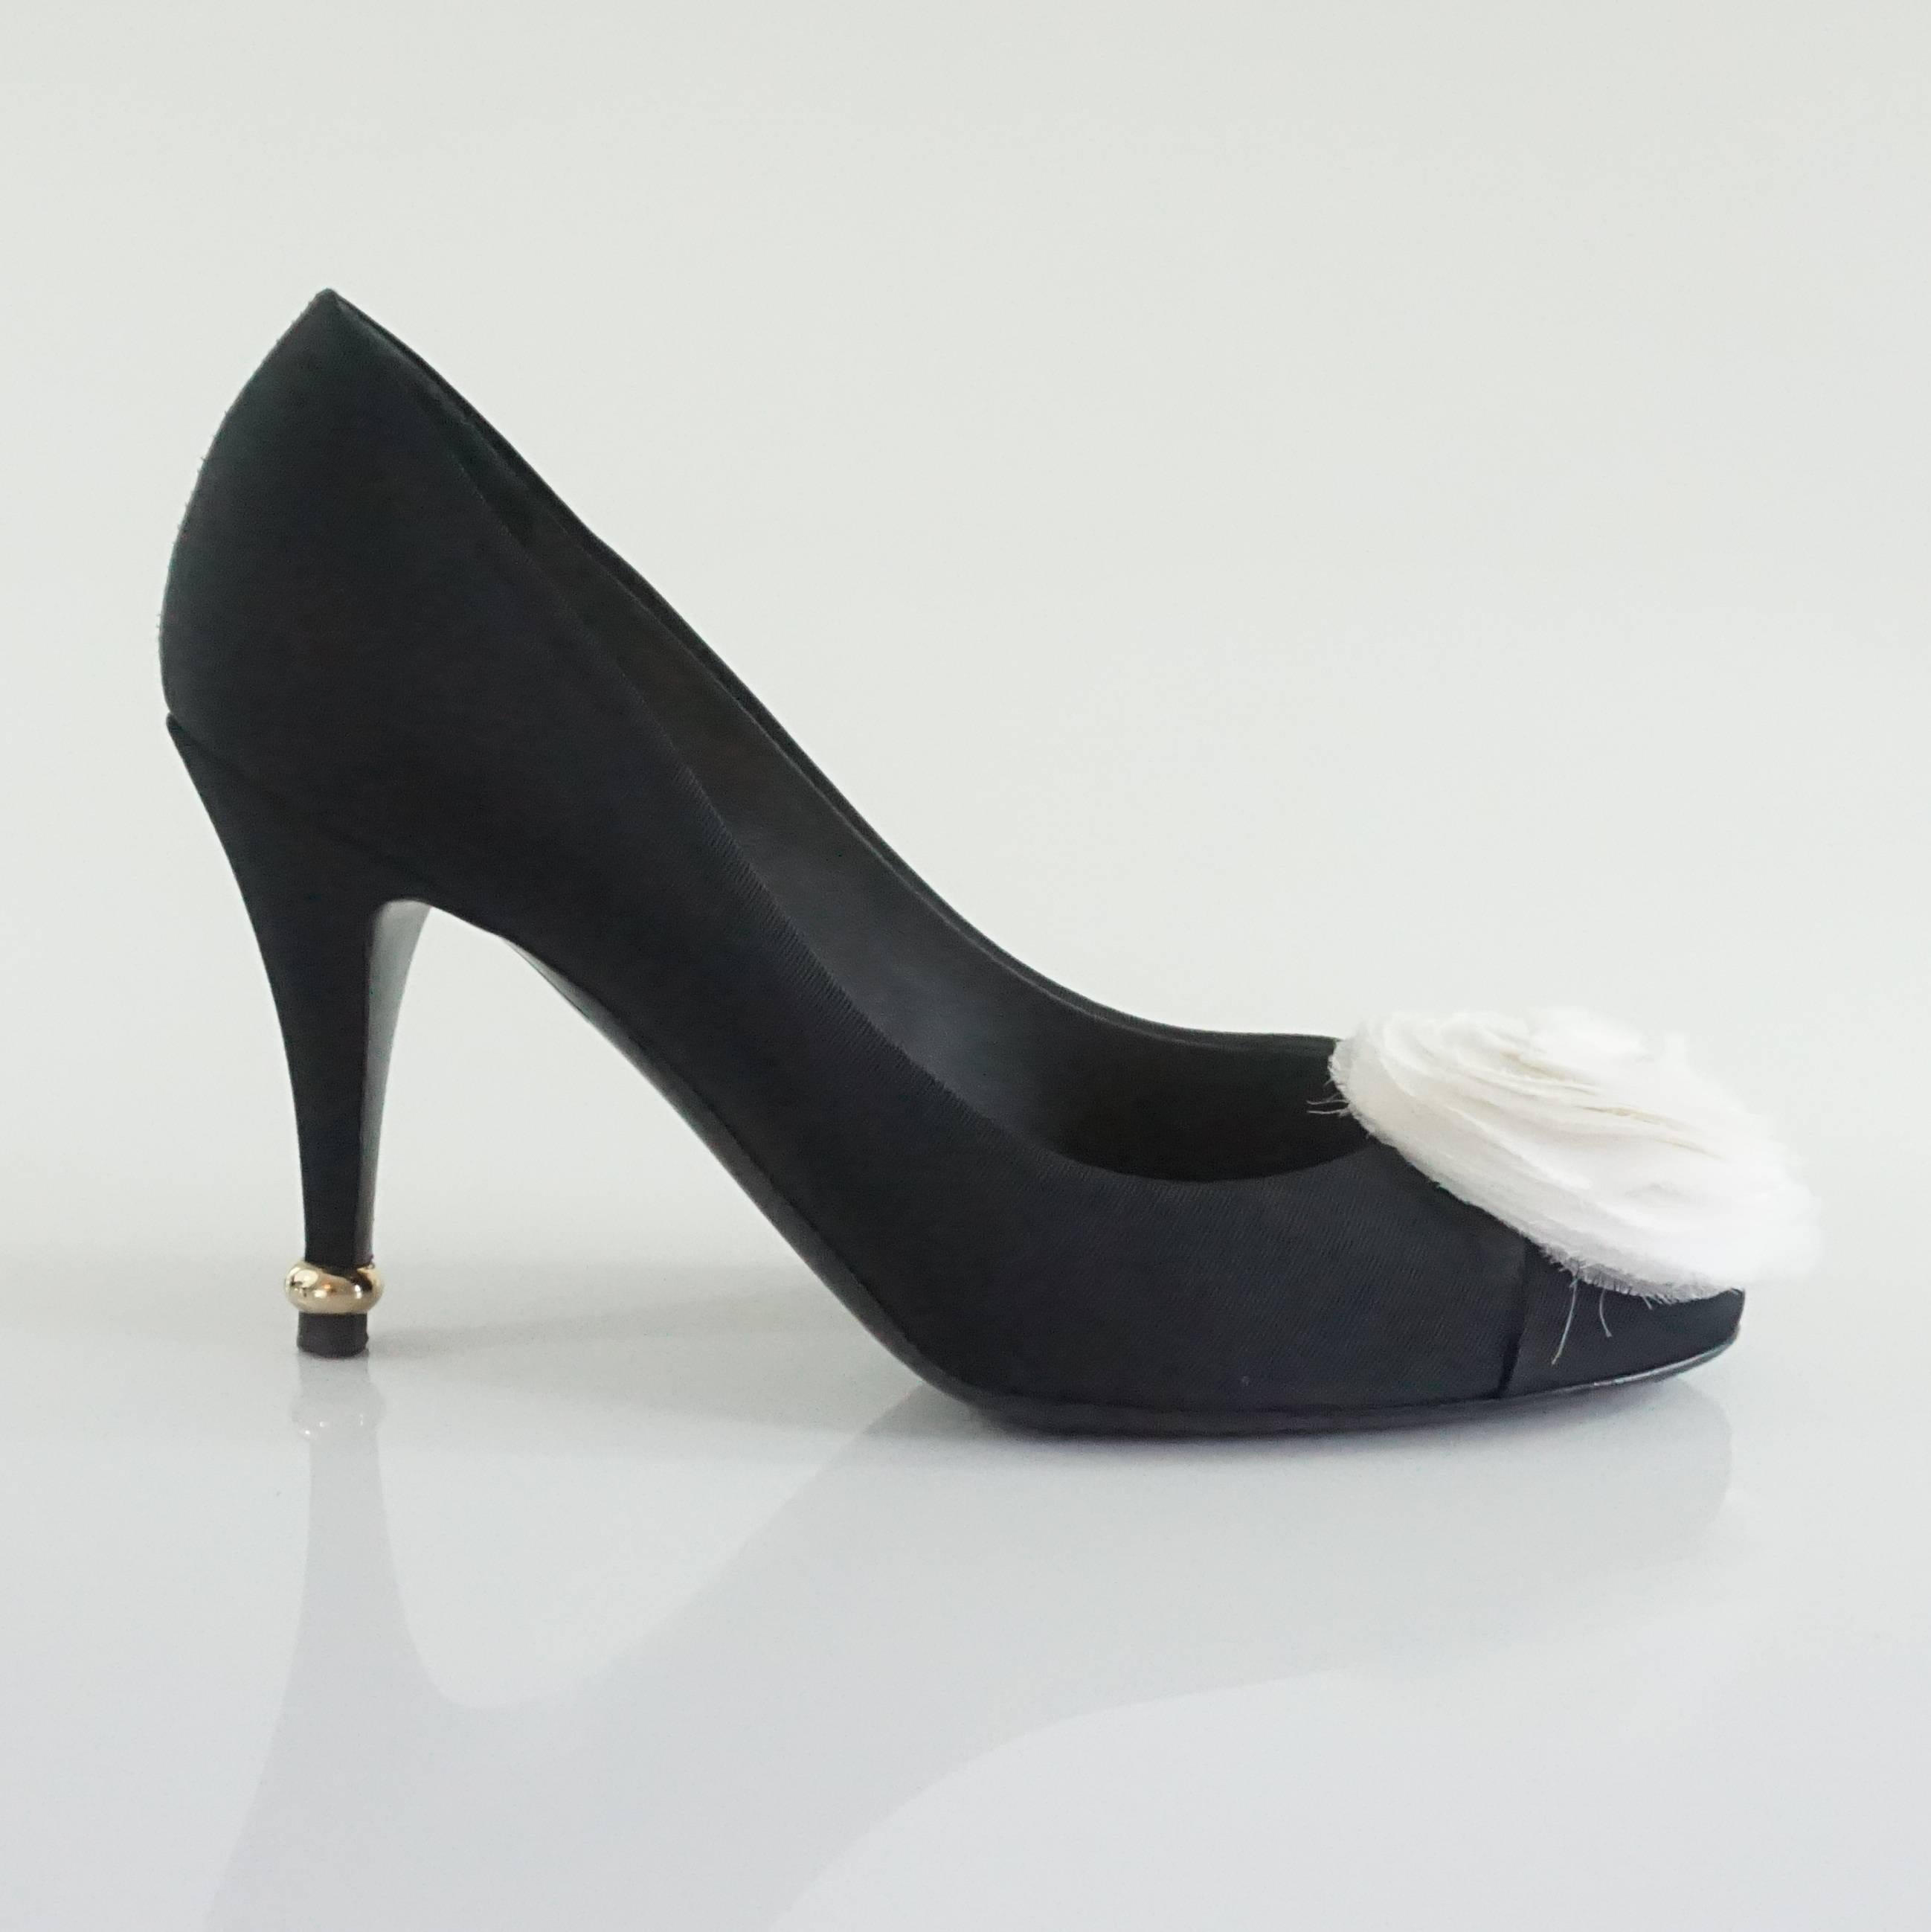 The beautiful Chanel black grosgrain pumps have an ivory silk camellia on the toe. There is a small silver detail with "Chanel" engraved on the heel. These shoes are very good condition with some minor wear on the bottom. 

Heel Height: